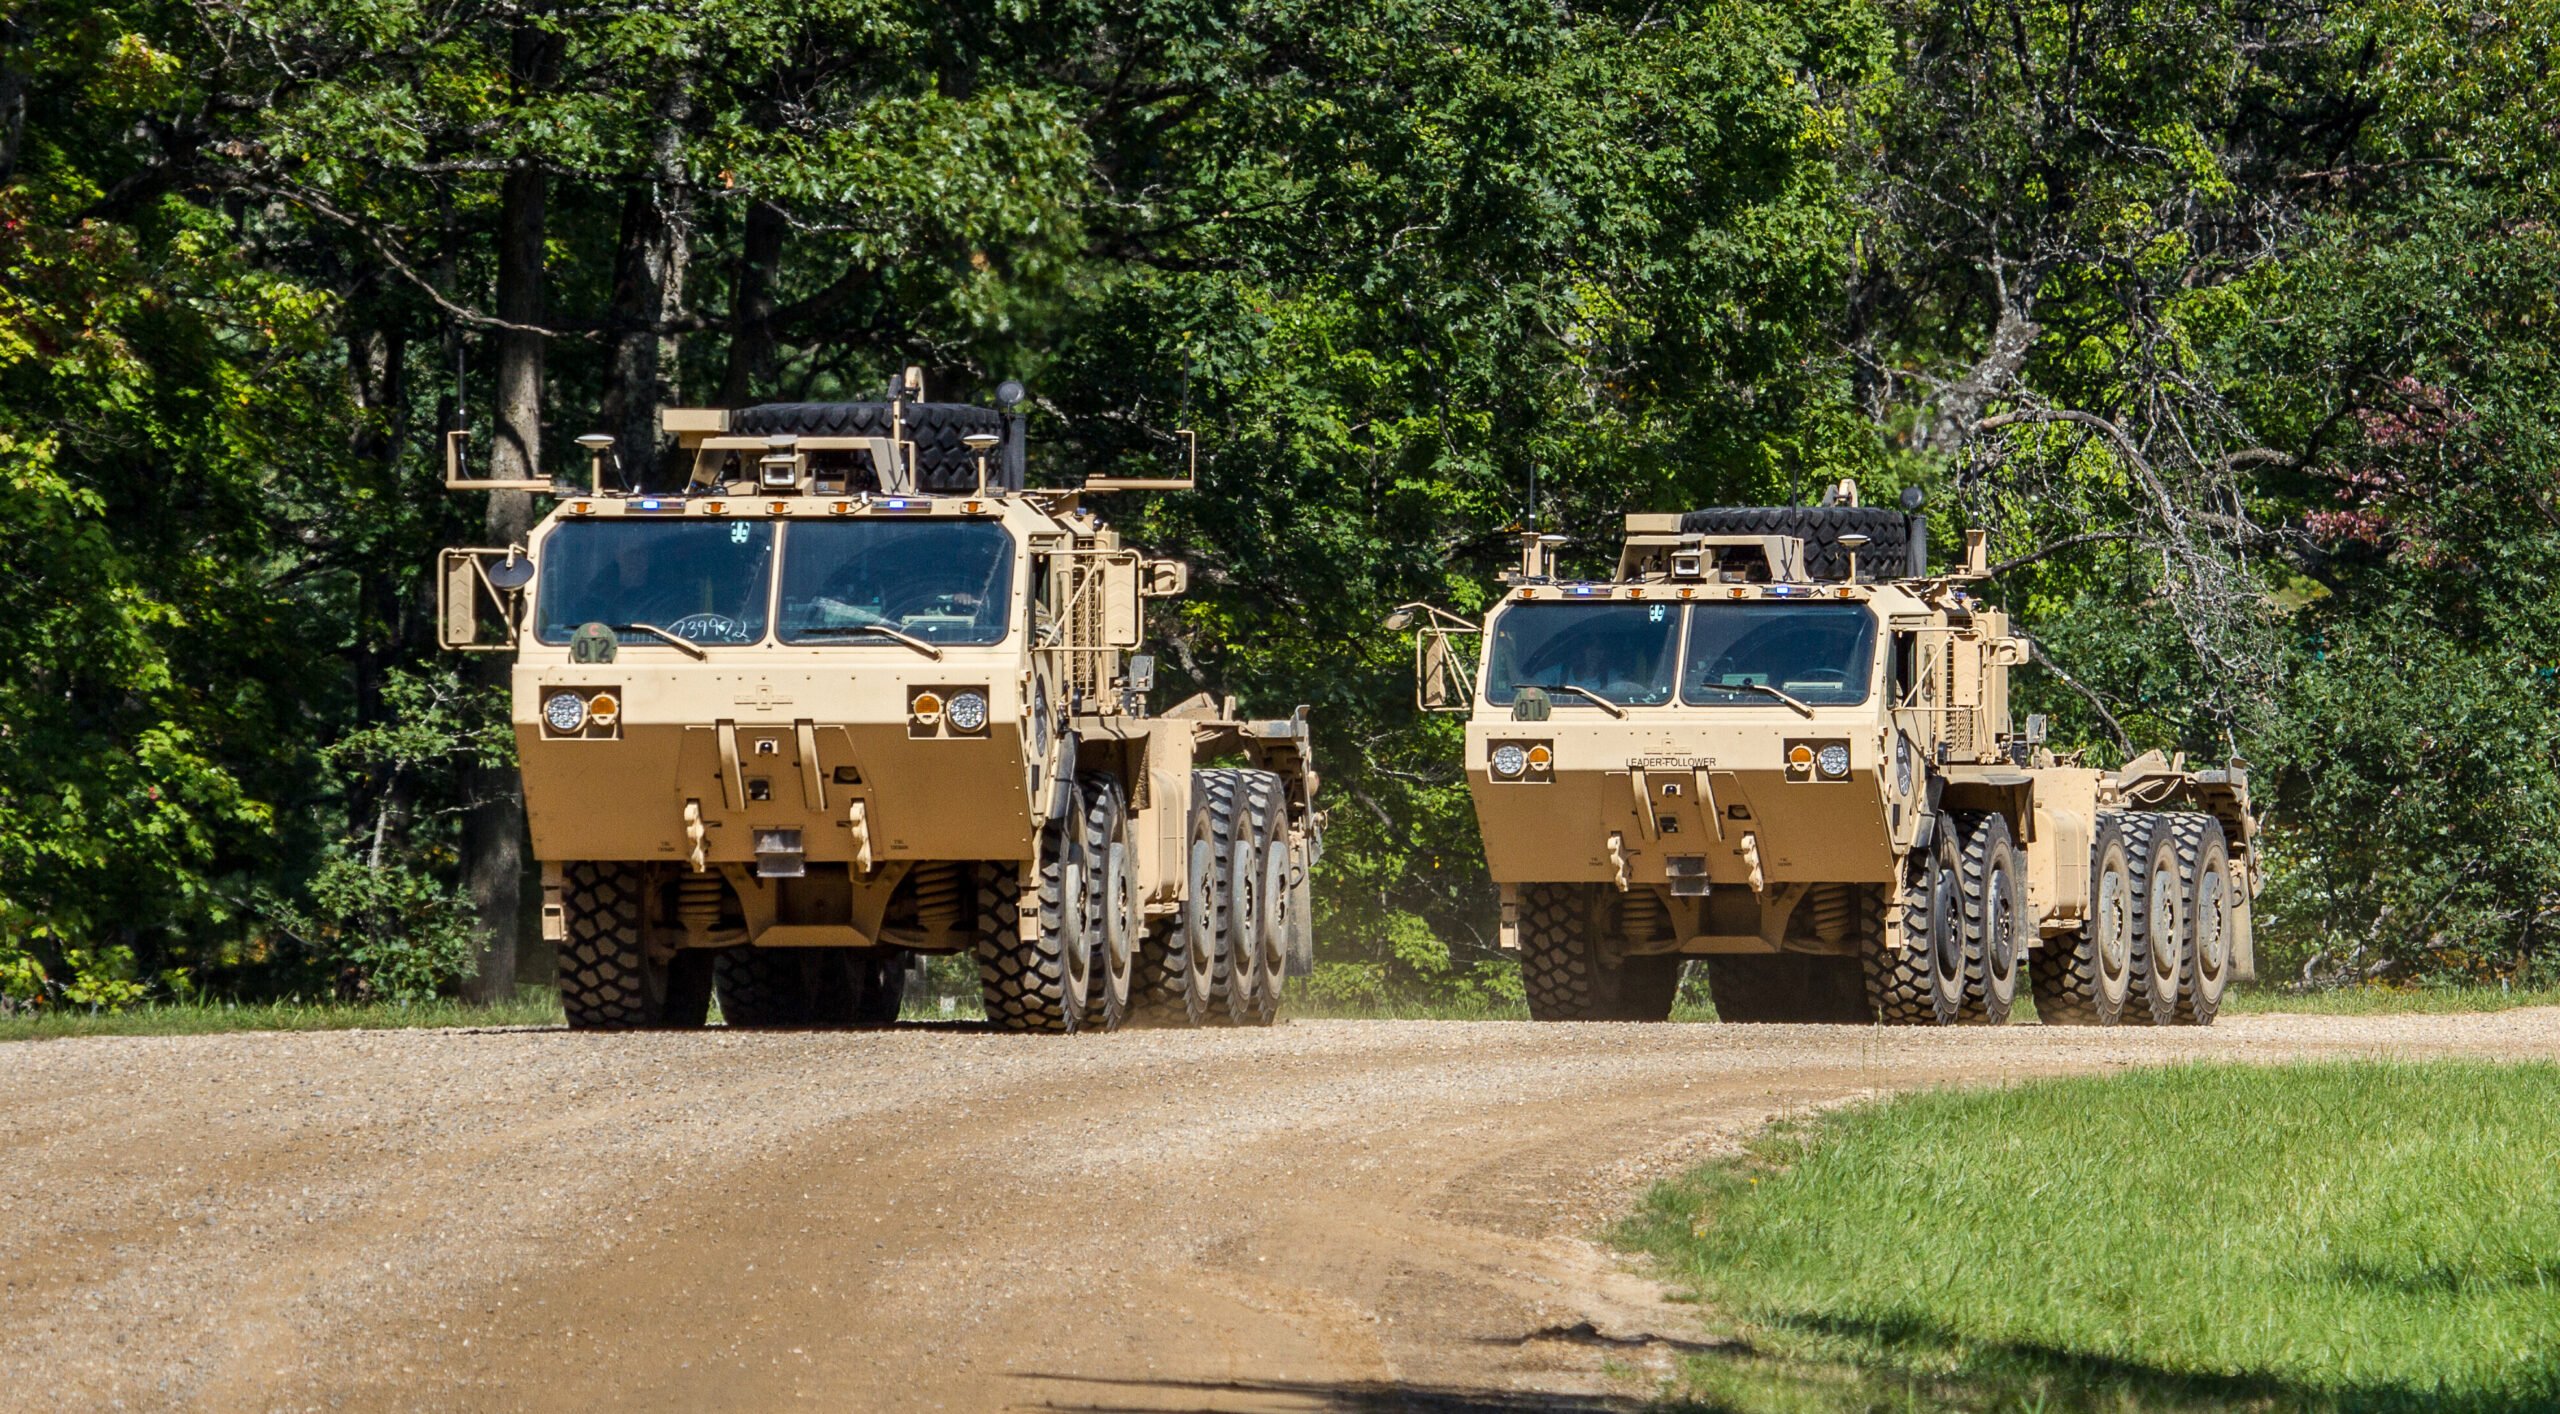 Army closing down ‘leader-follower’ robotic truck development, eyeing commercial solutions